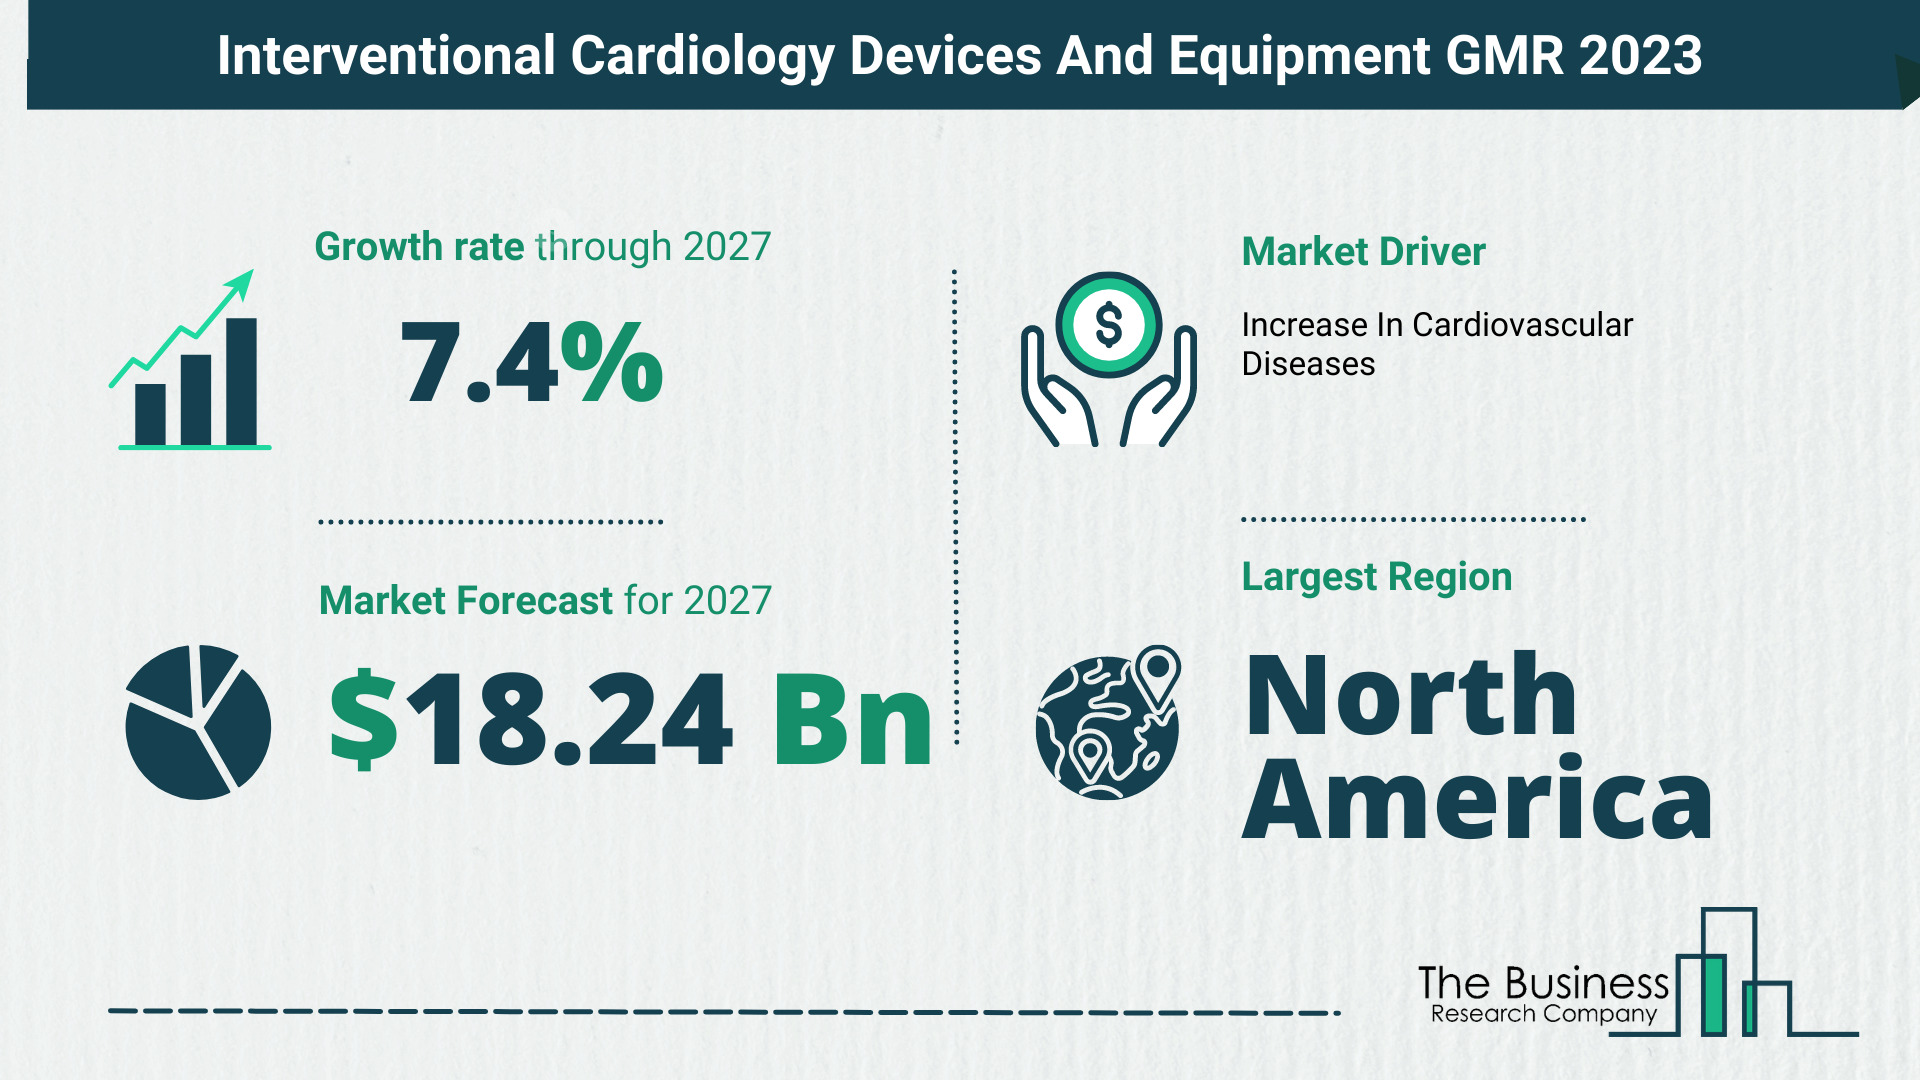 Interventional Cardiology Devices And Equipment Market Overview: Market Size, Drivers And Trends